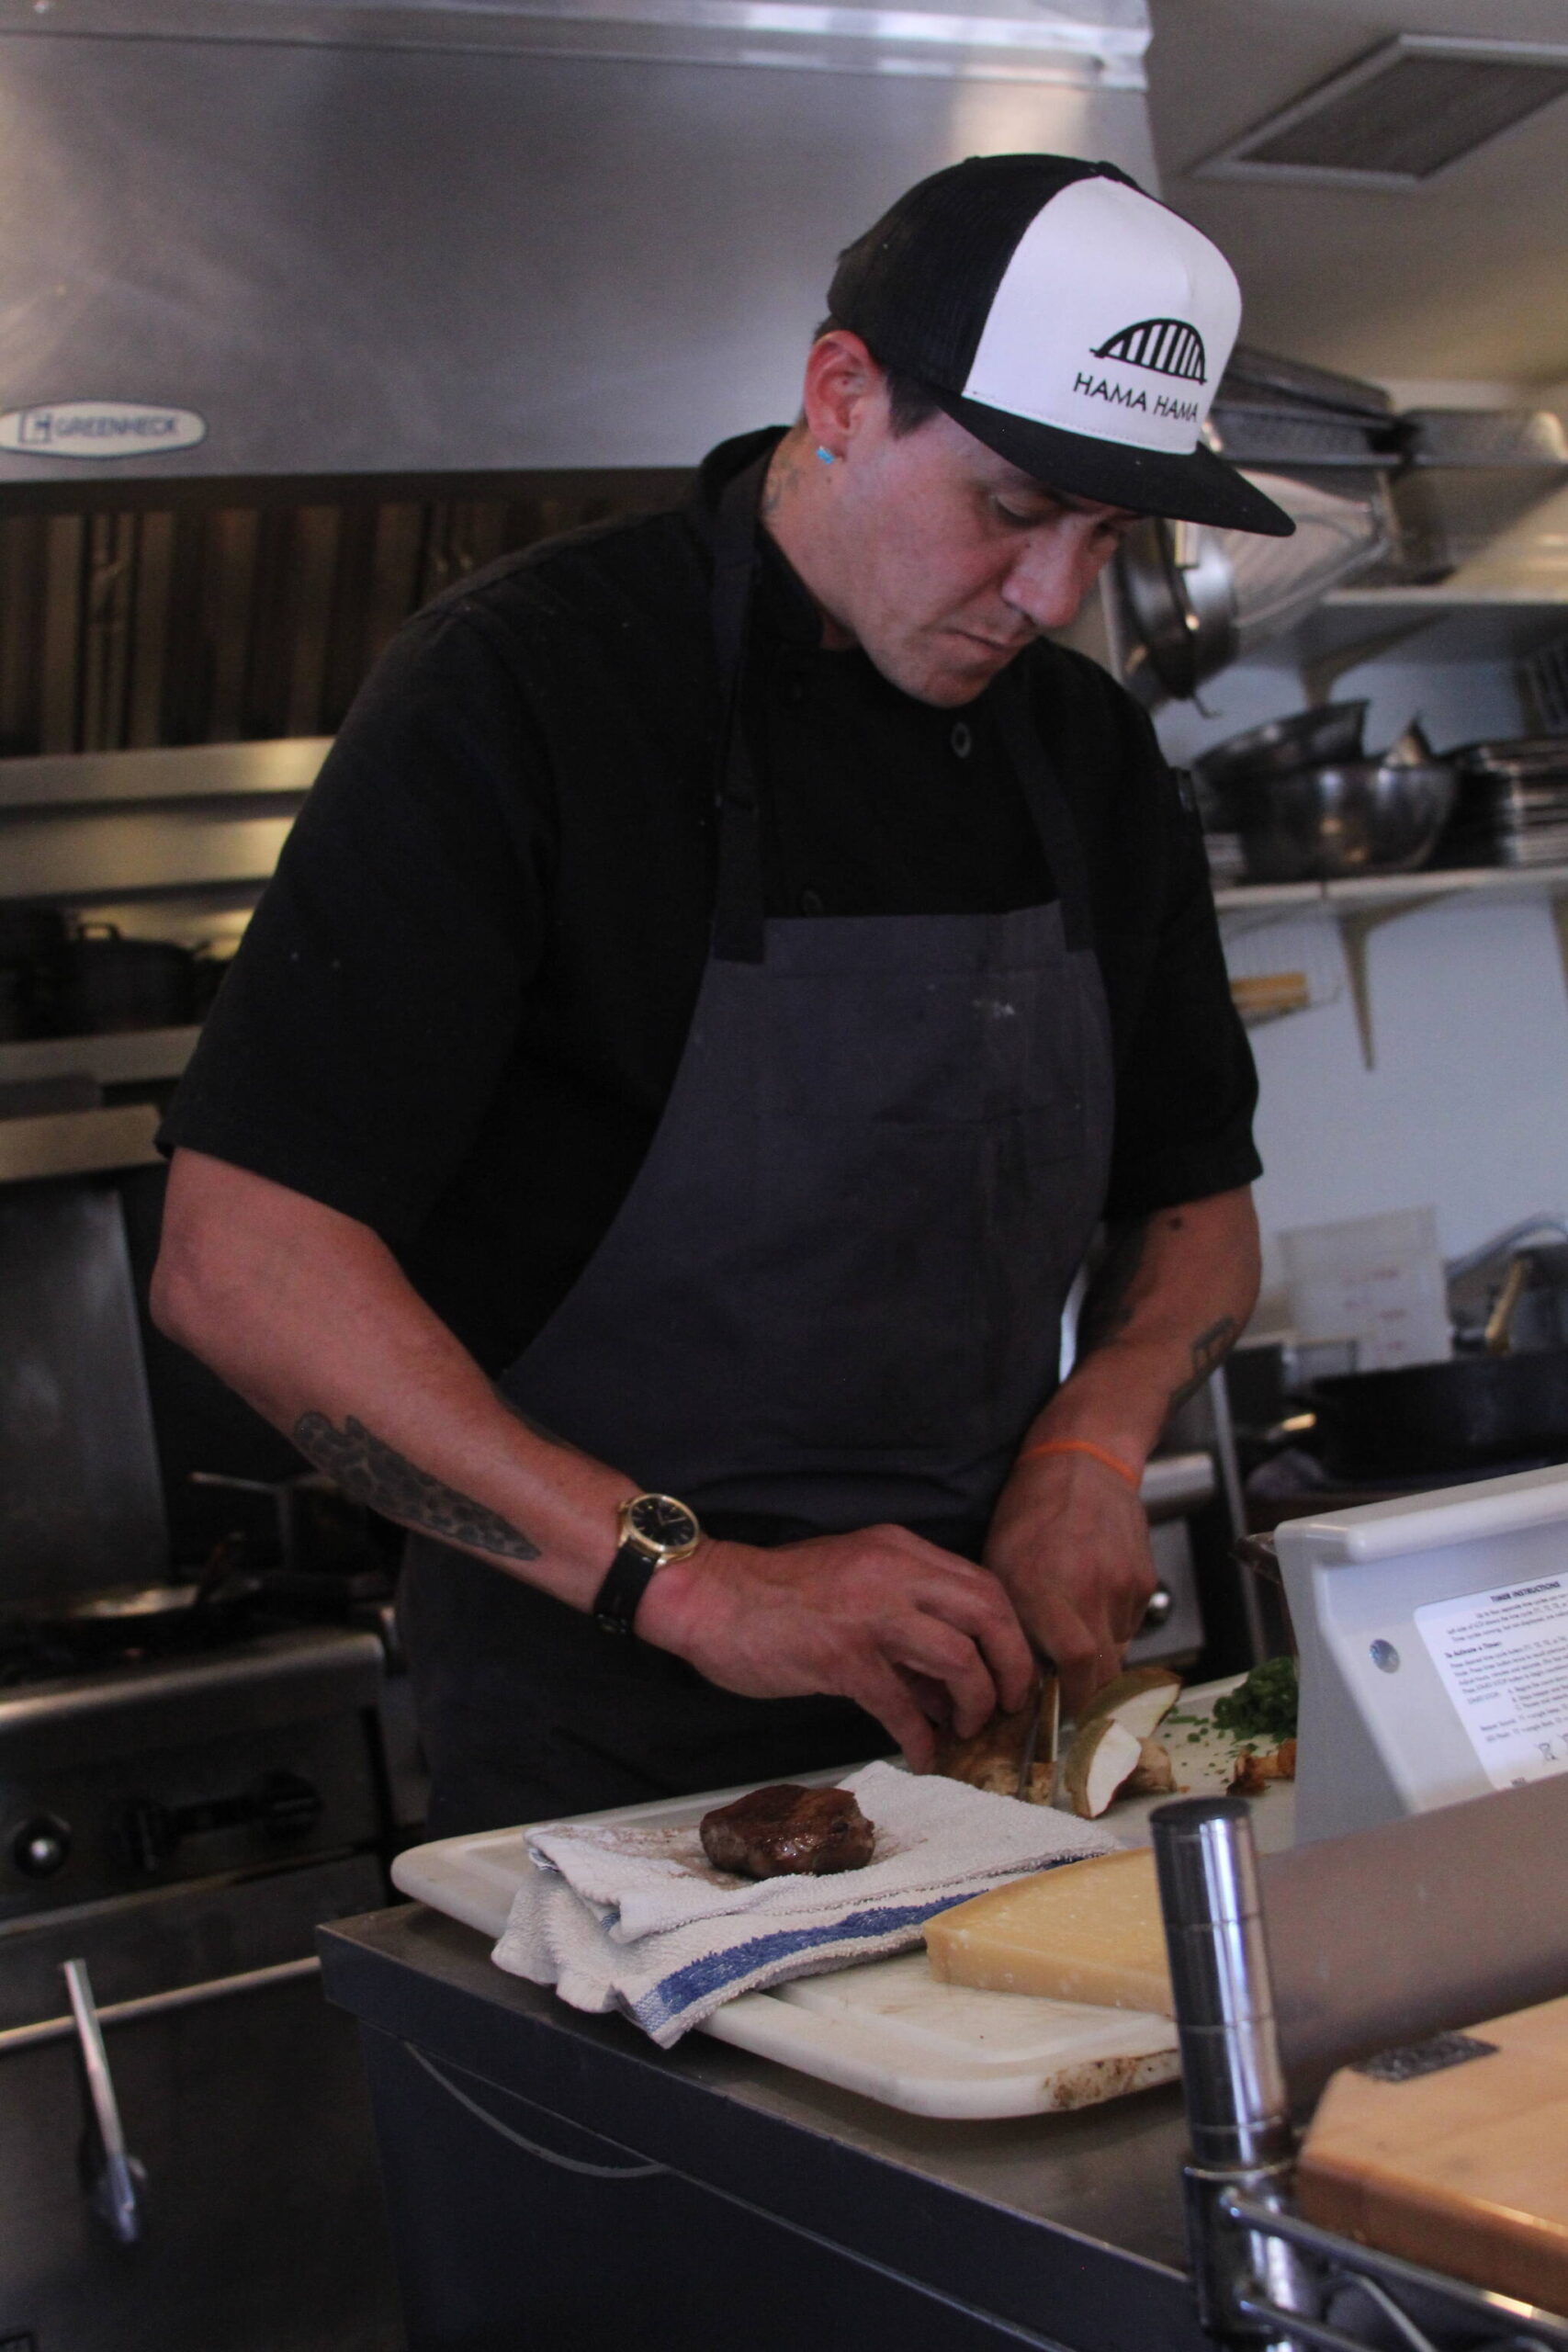 Photo by Karina Andrew/Whidbey News-Times
Ben Jones prepares ingredients for a meal at Oystercatcher.